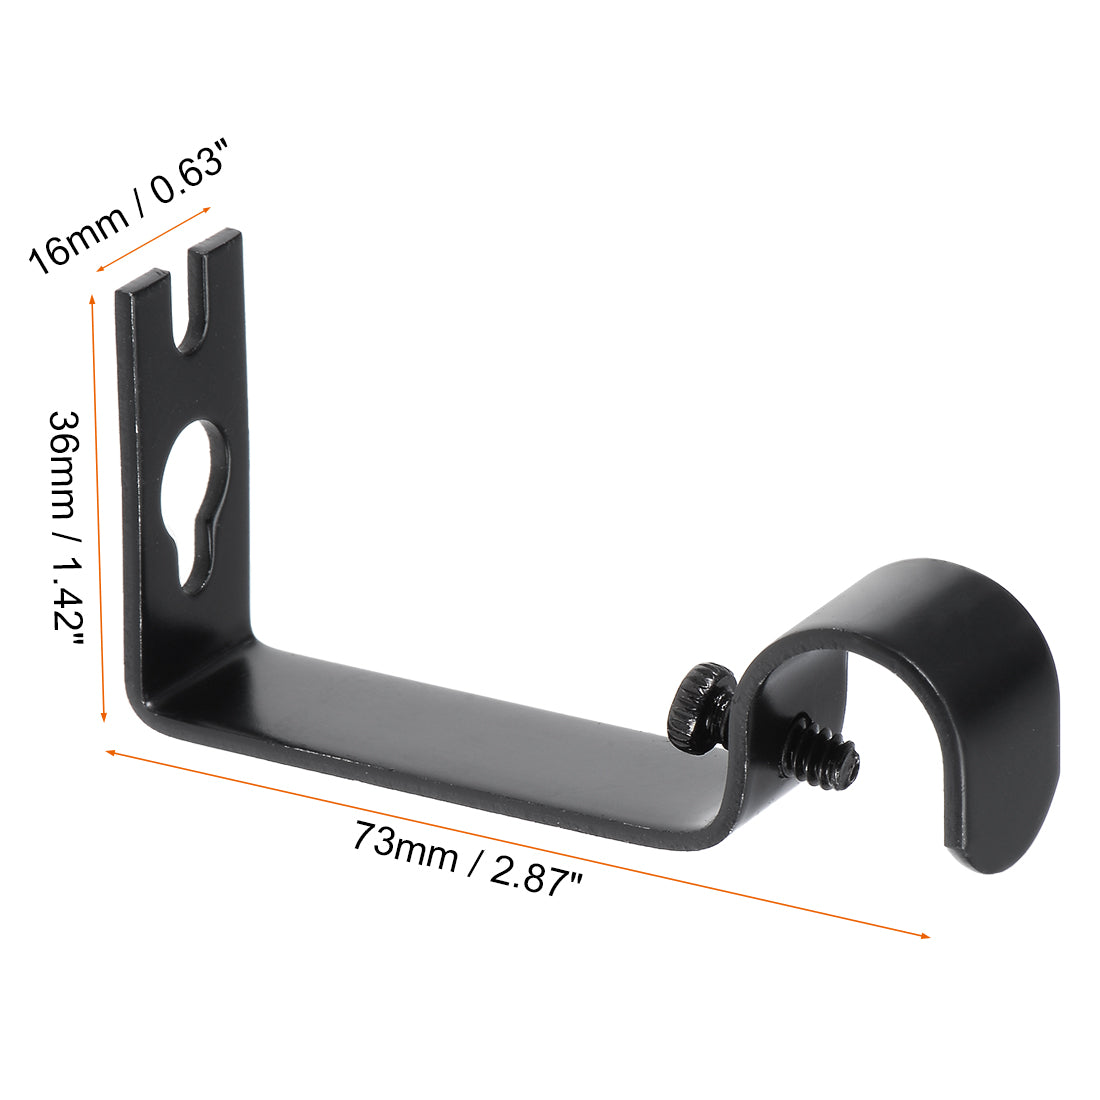 uxcell Uxcell Curtain Rod Bracket Iron Single Holder Support for 16mm Drapery Rod, 73 x 36 x 16mm Black 2Pcs